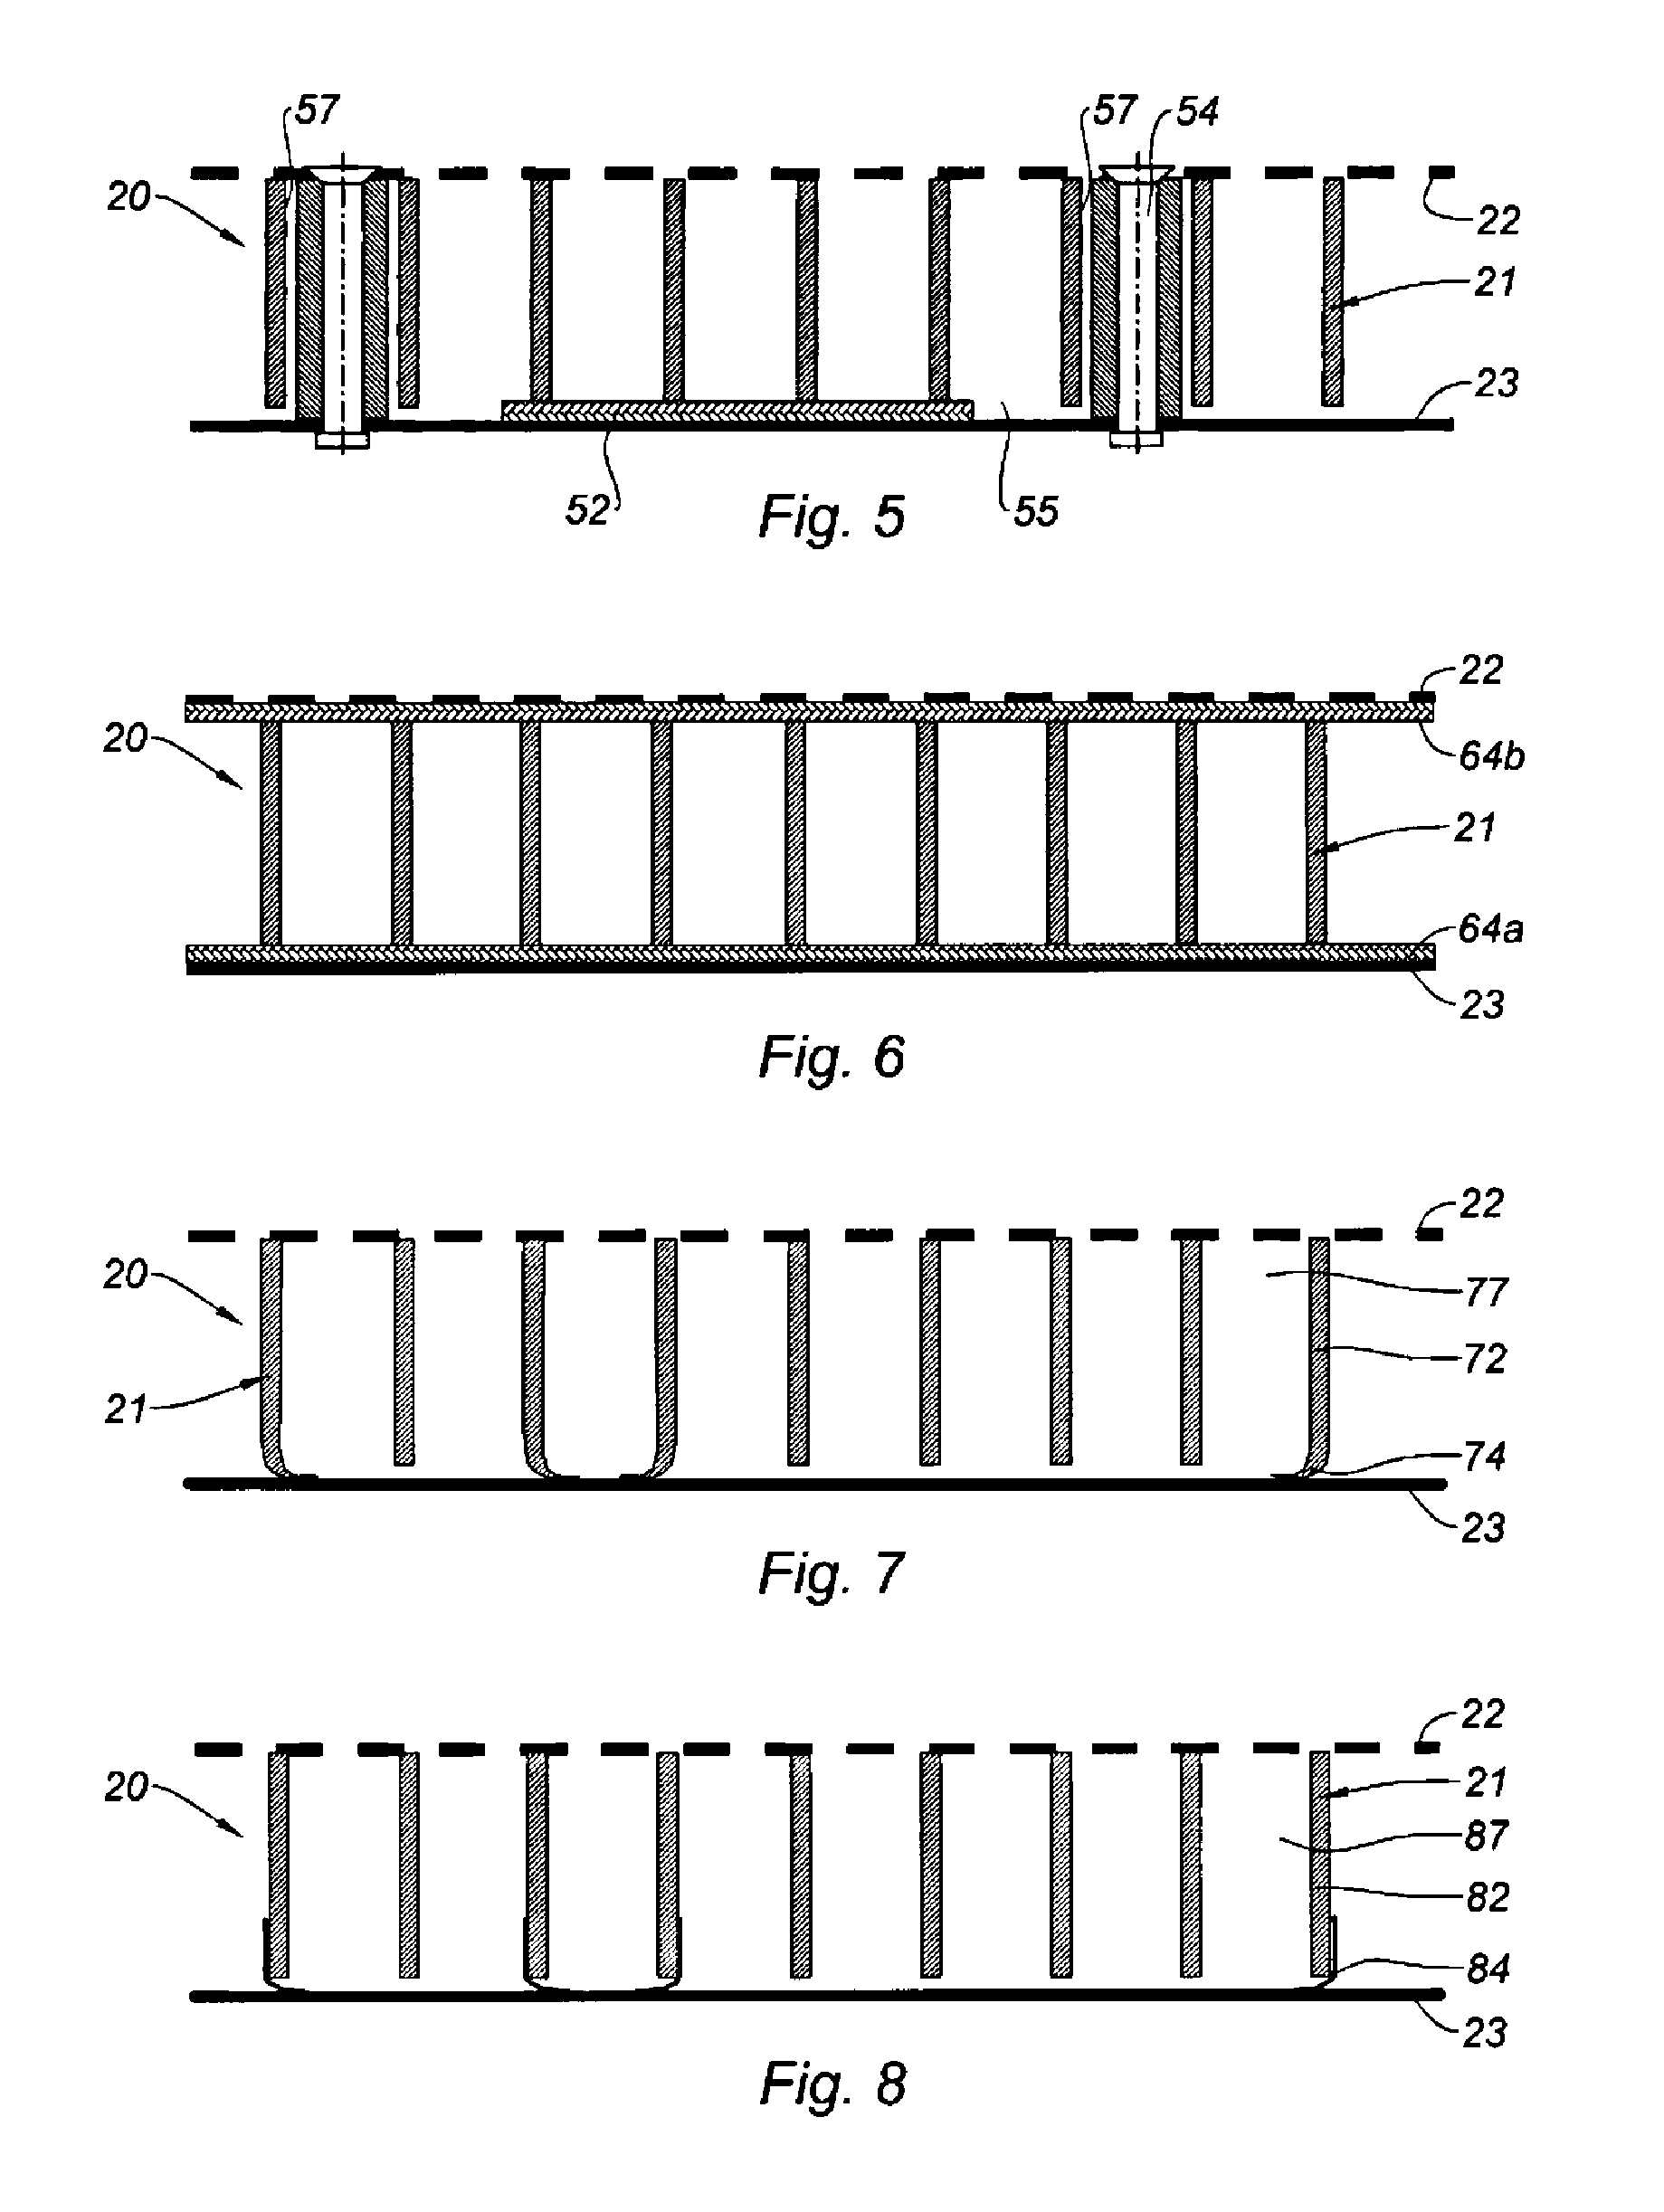 Acoustic panel for an ejector nozzle